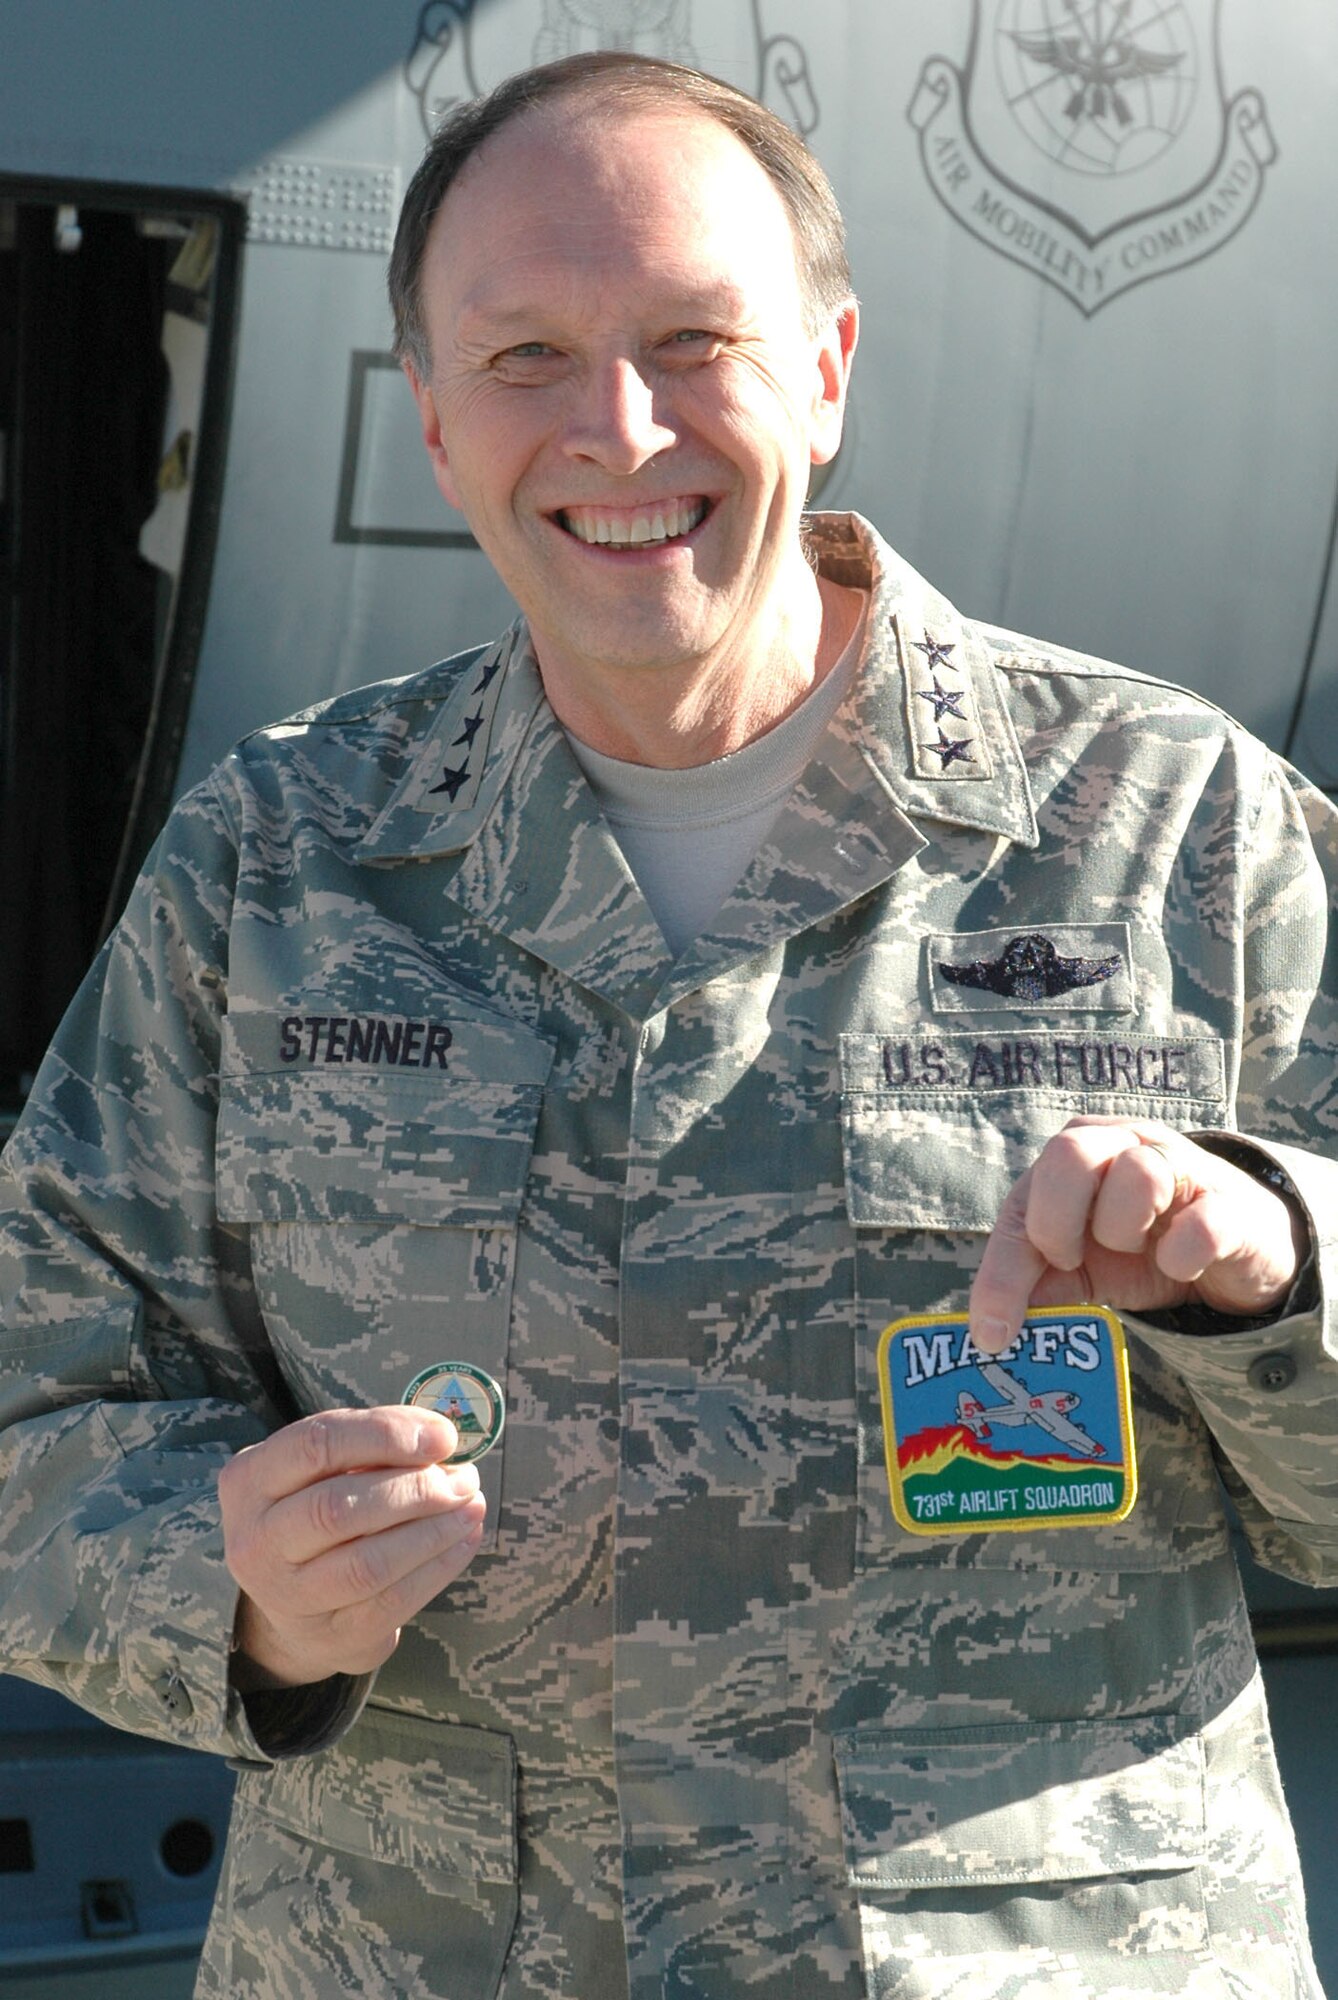 Lt. Gen. Charles Stenner, Jr., proudly presents his modular airborne firefighting system, or 'MAFFS' coin and patch Nov. 12 after a system's orientation flight at Peterson Air Force Base, Colo. General Stenner, commander of the Air Force Reserve, visited the base to gain a better understanding of the wing and its sister unit, the 310th Space Wing, based at Schriever AFB, Colo. Together with a demonstration flight on the firefighting system, the general also held a question-and-answer session at the base's club. The MAFFS system is used in wild land firefighting missions when called up to support state officials in the U.S. when all other firefighting methods have been exhausted. (U.S. Air Force photo/Ann Skarban)